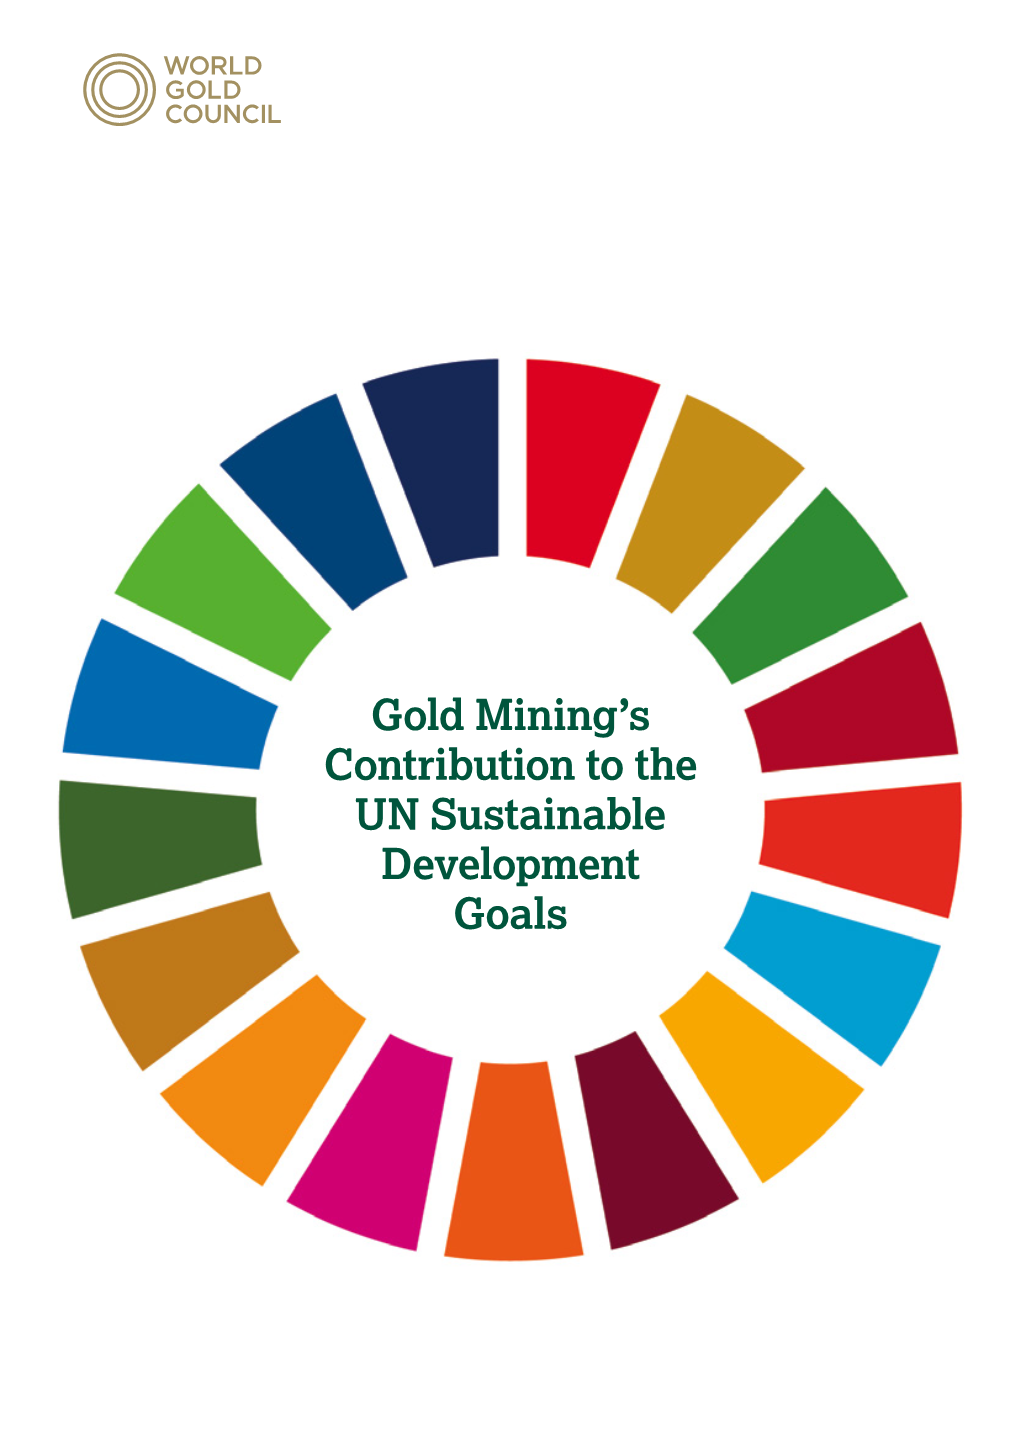 Gold Mining's Contribution to the UN Sustainable Development Goals